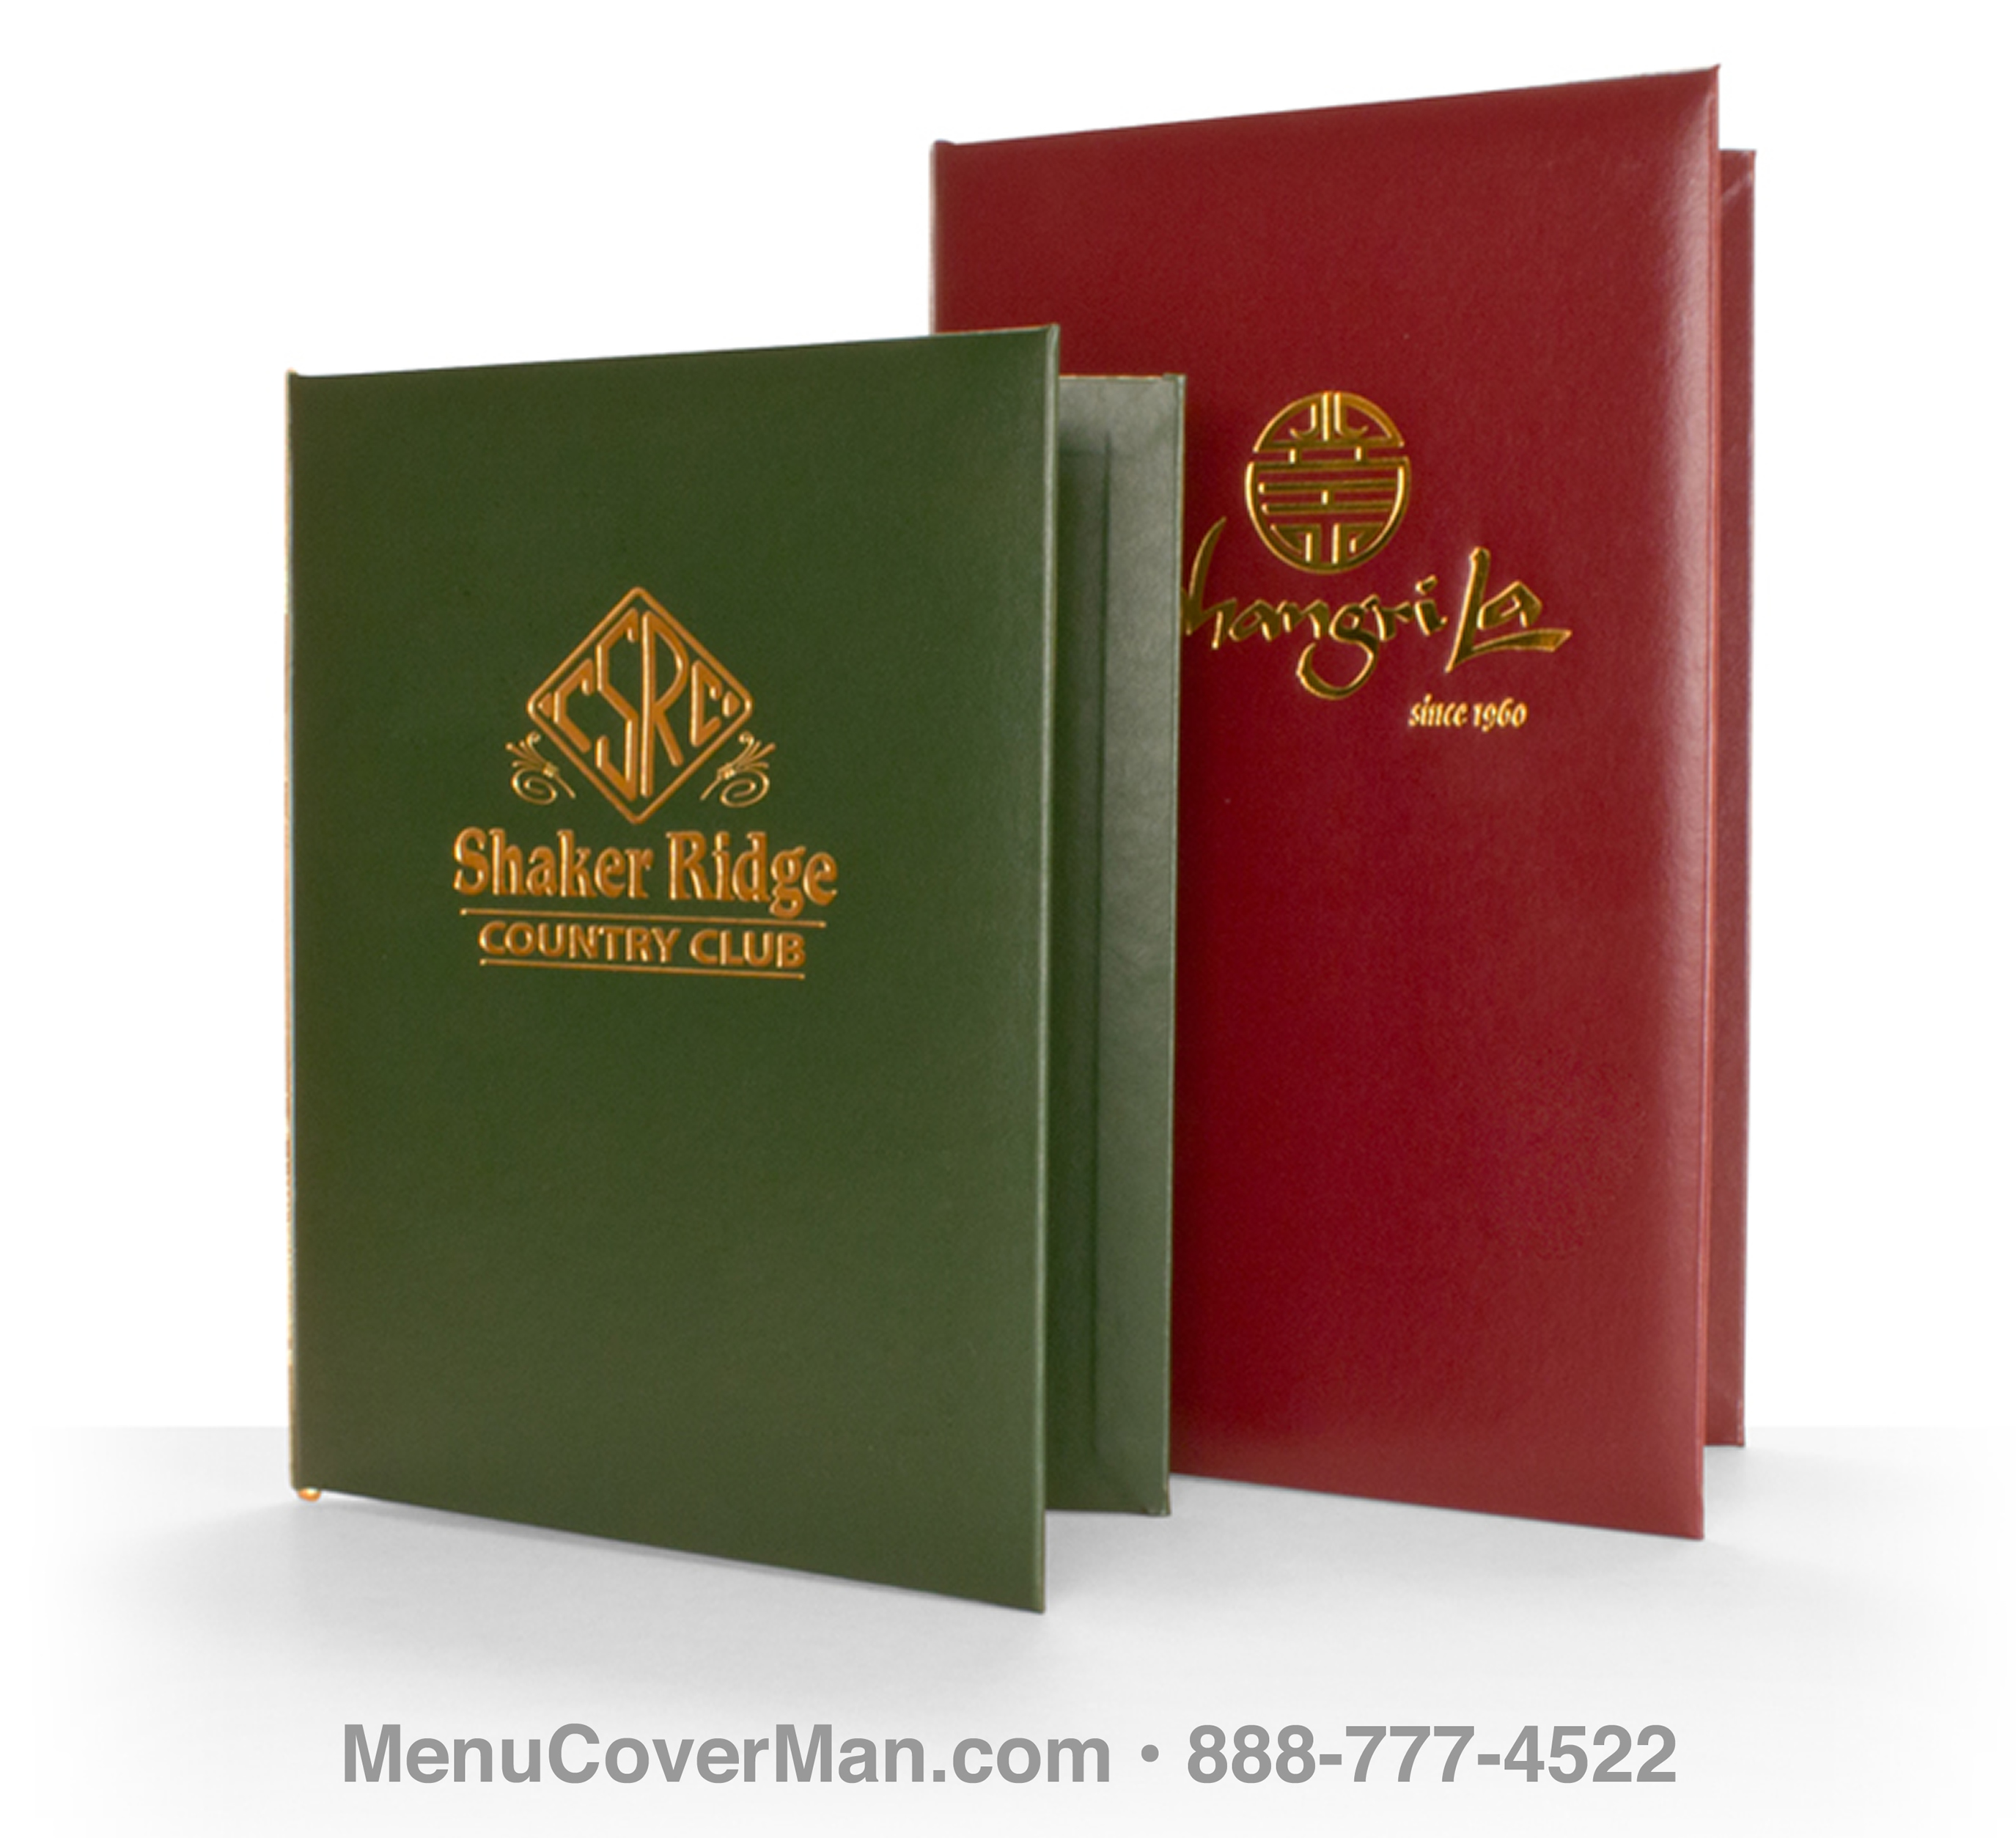 Augusta Menu Covers Frontspiece.